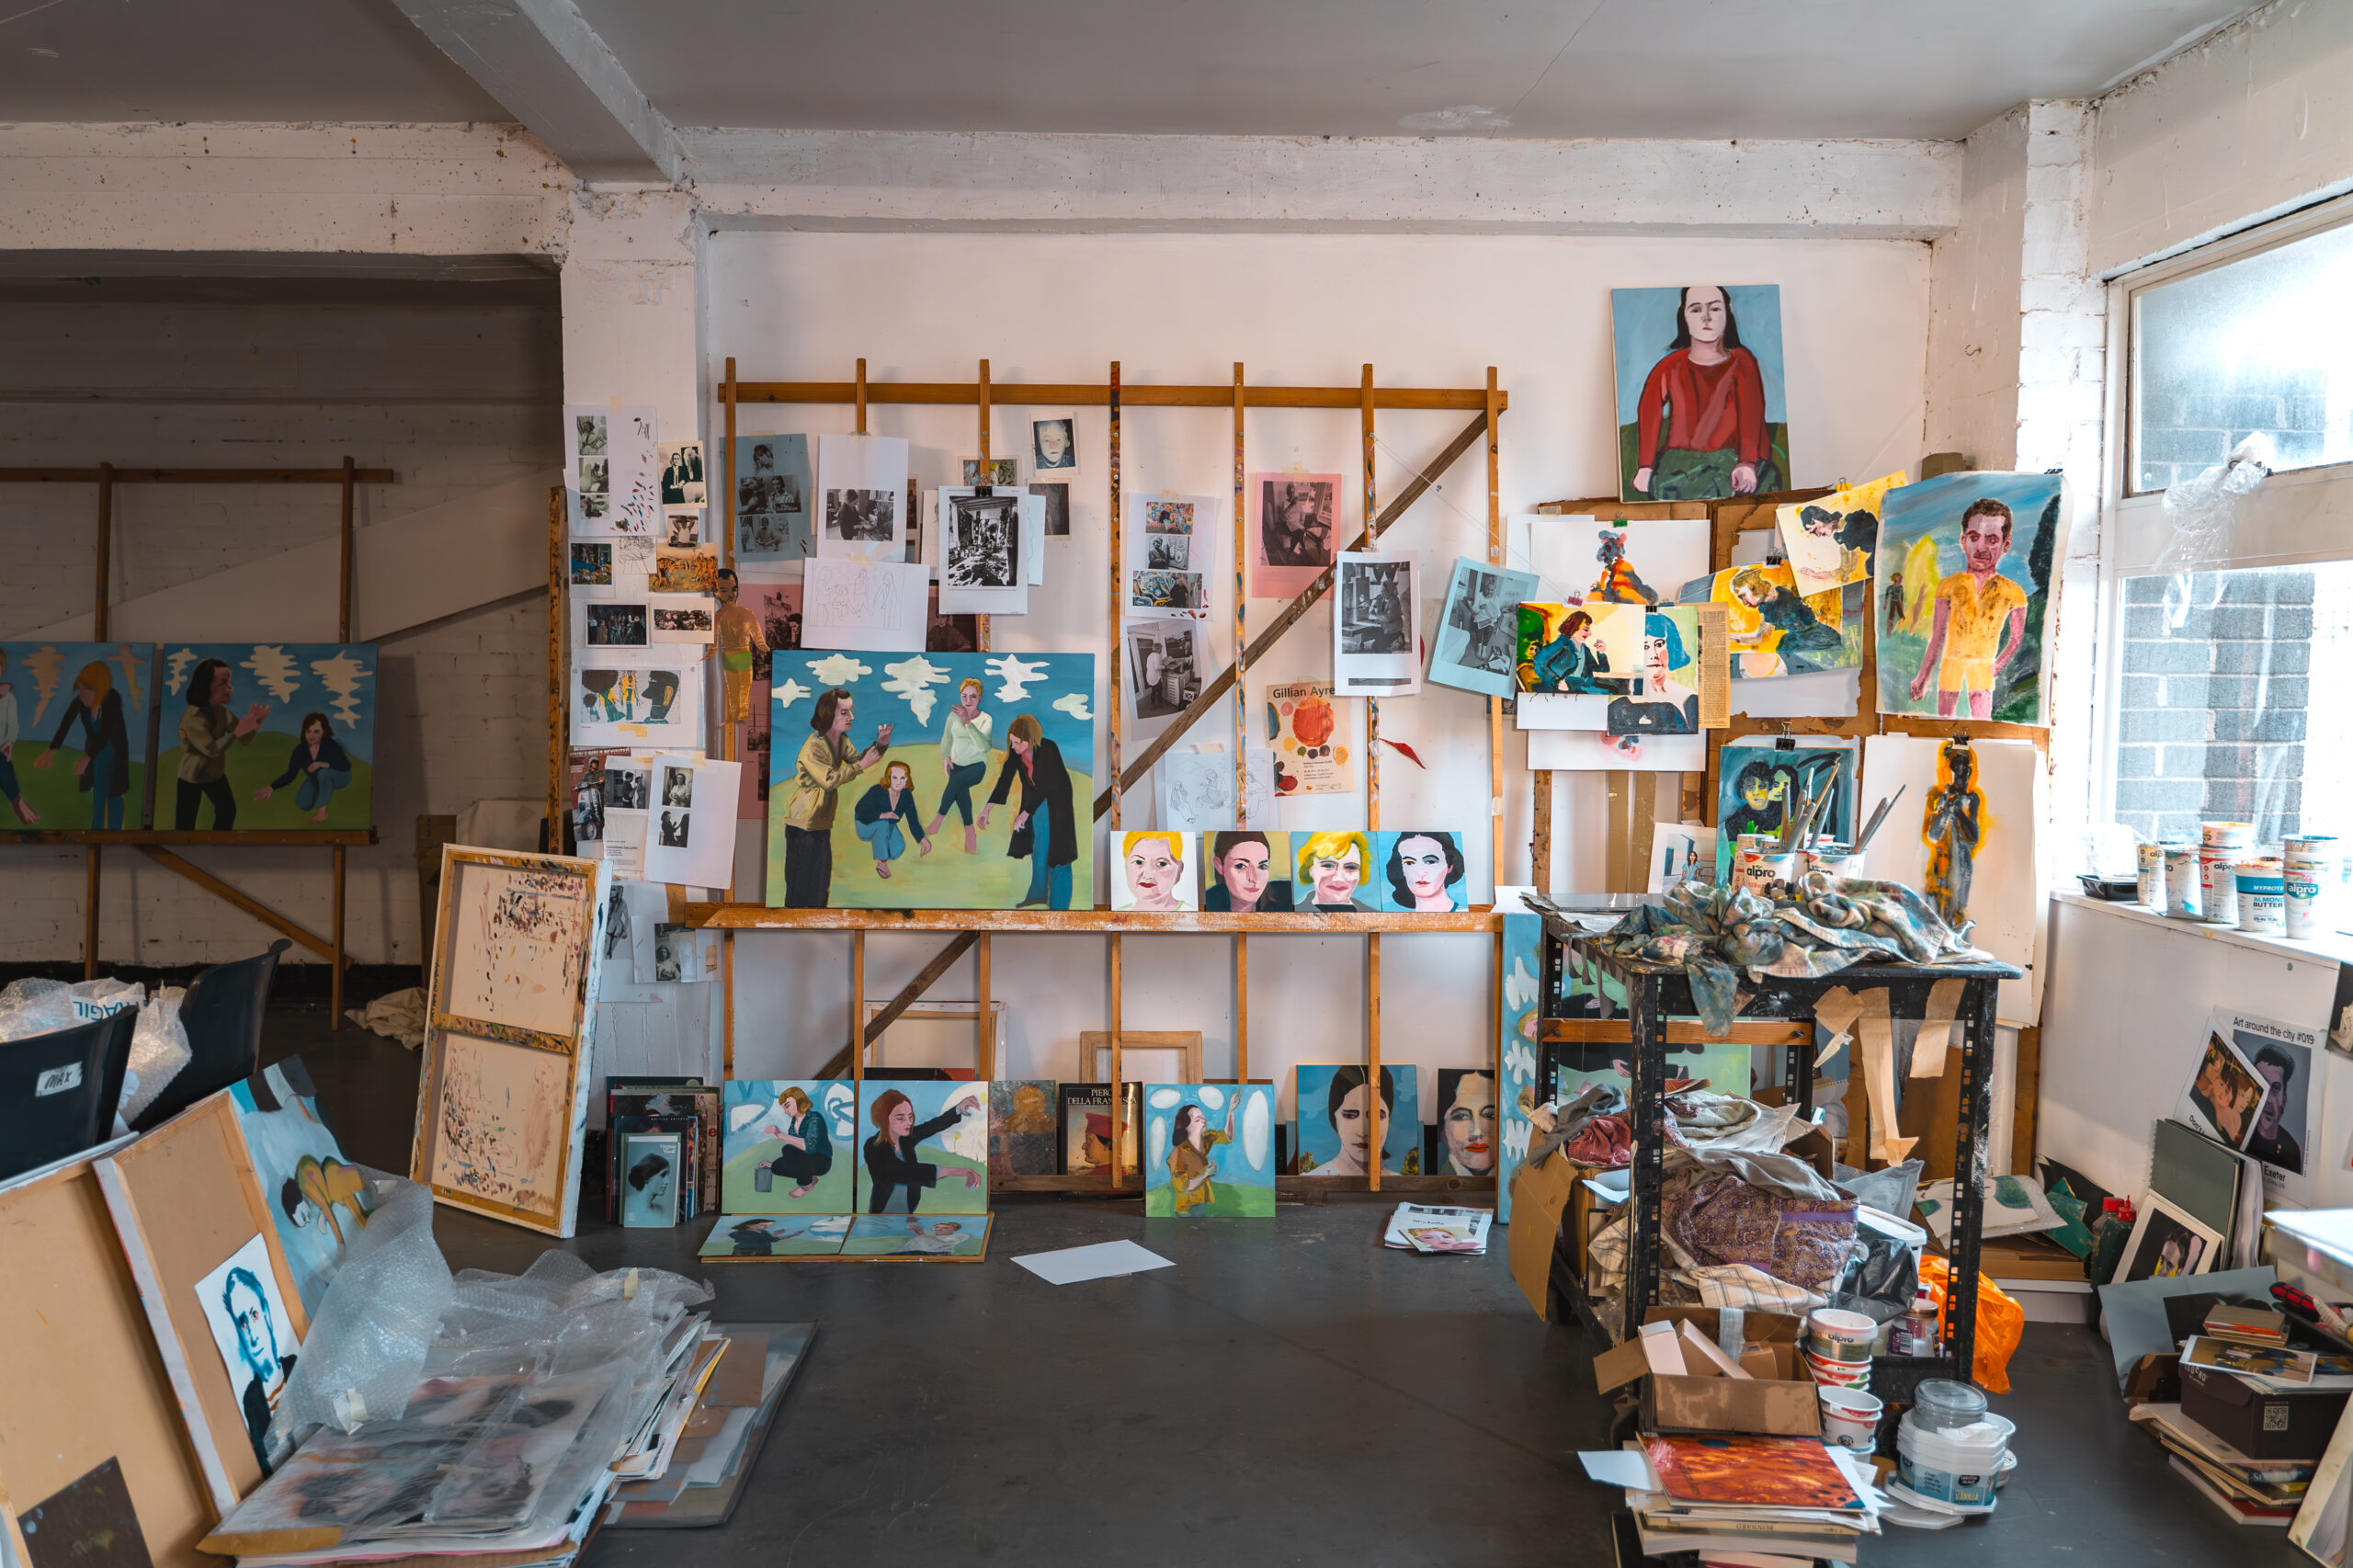 Janet Sainsbury's studio - a large room with a rack leaning against a wall, from which colourful paintings of figures are hanging